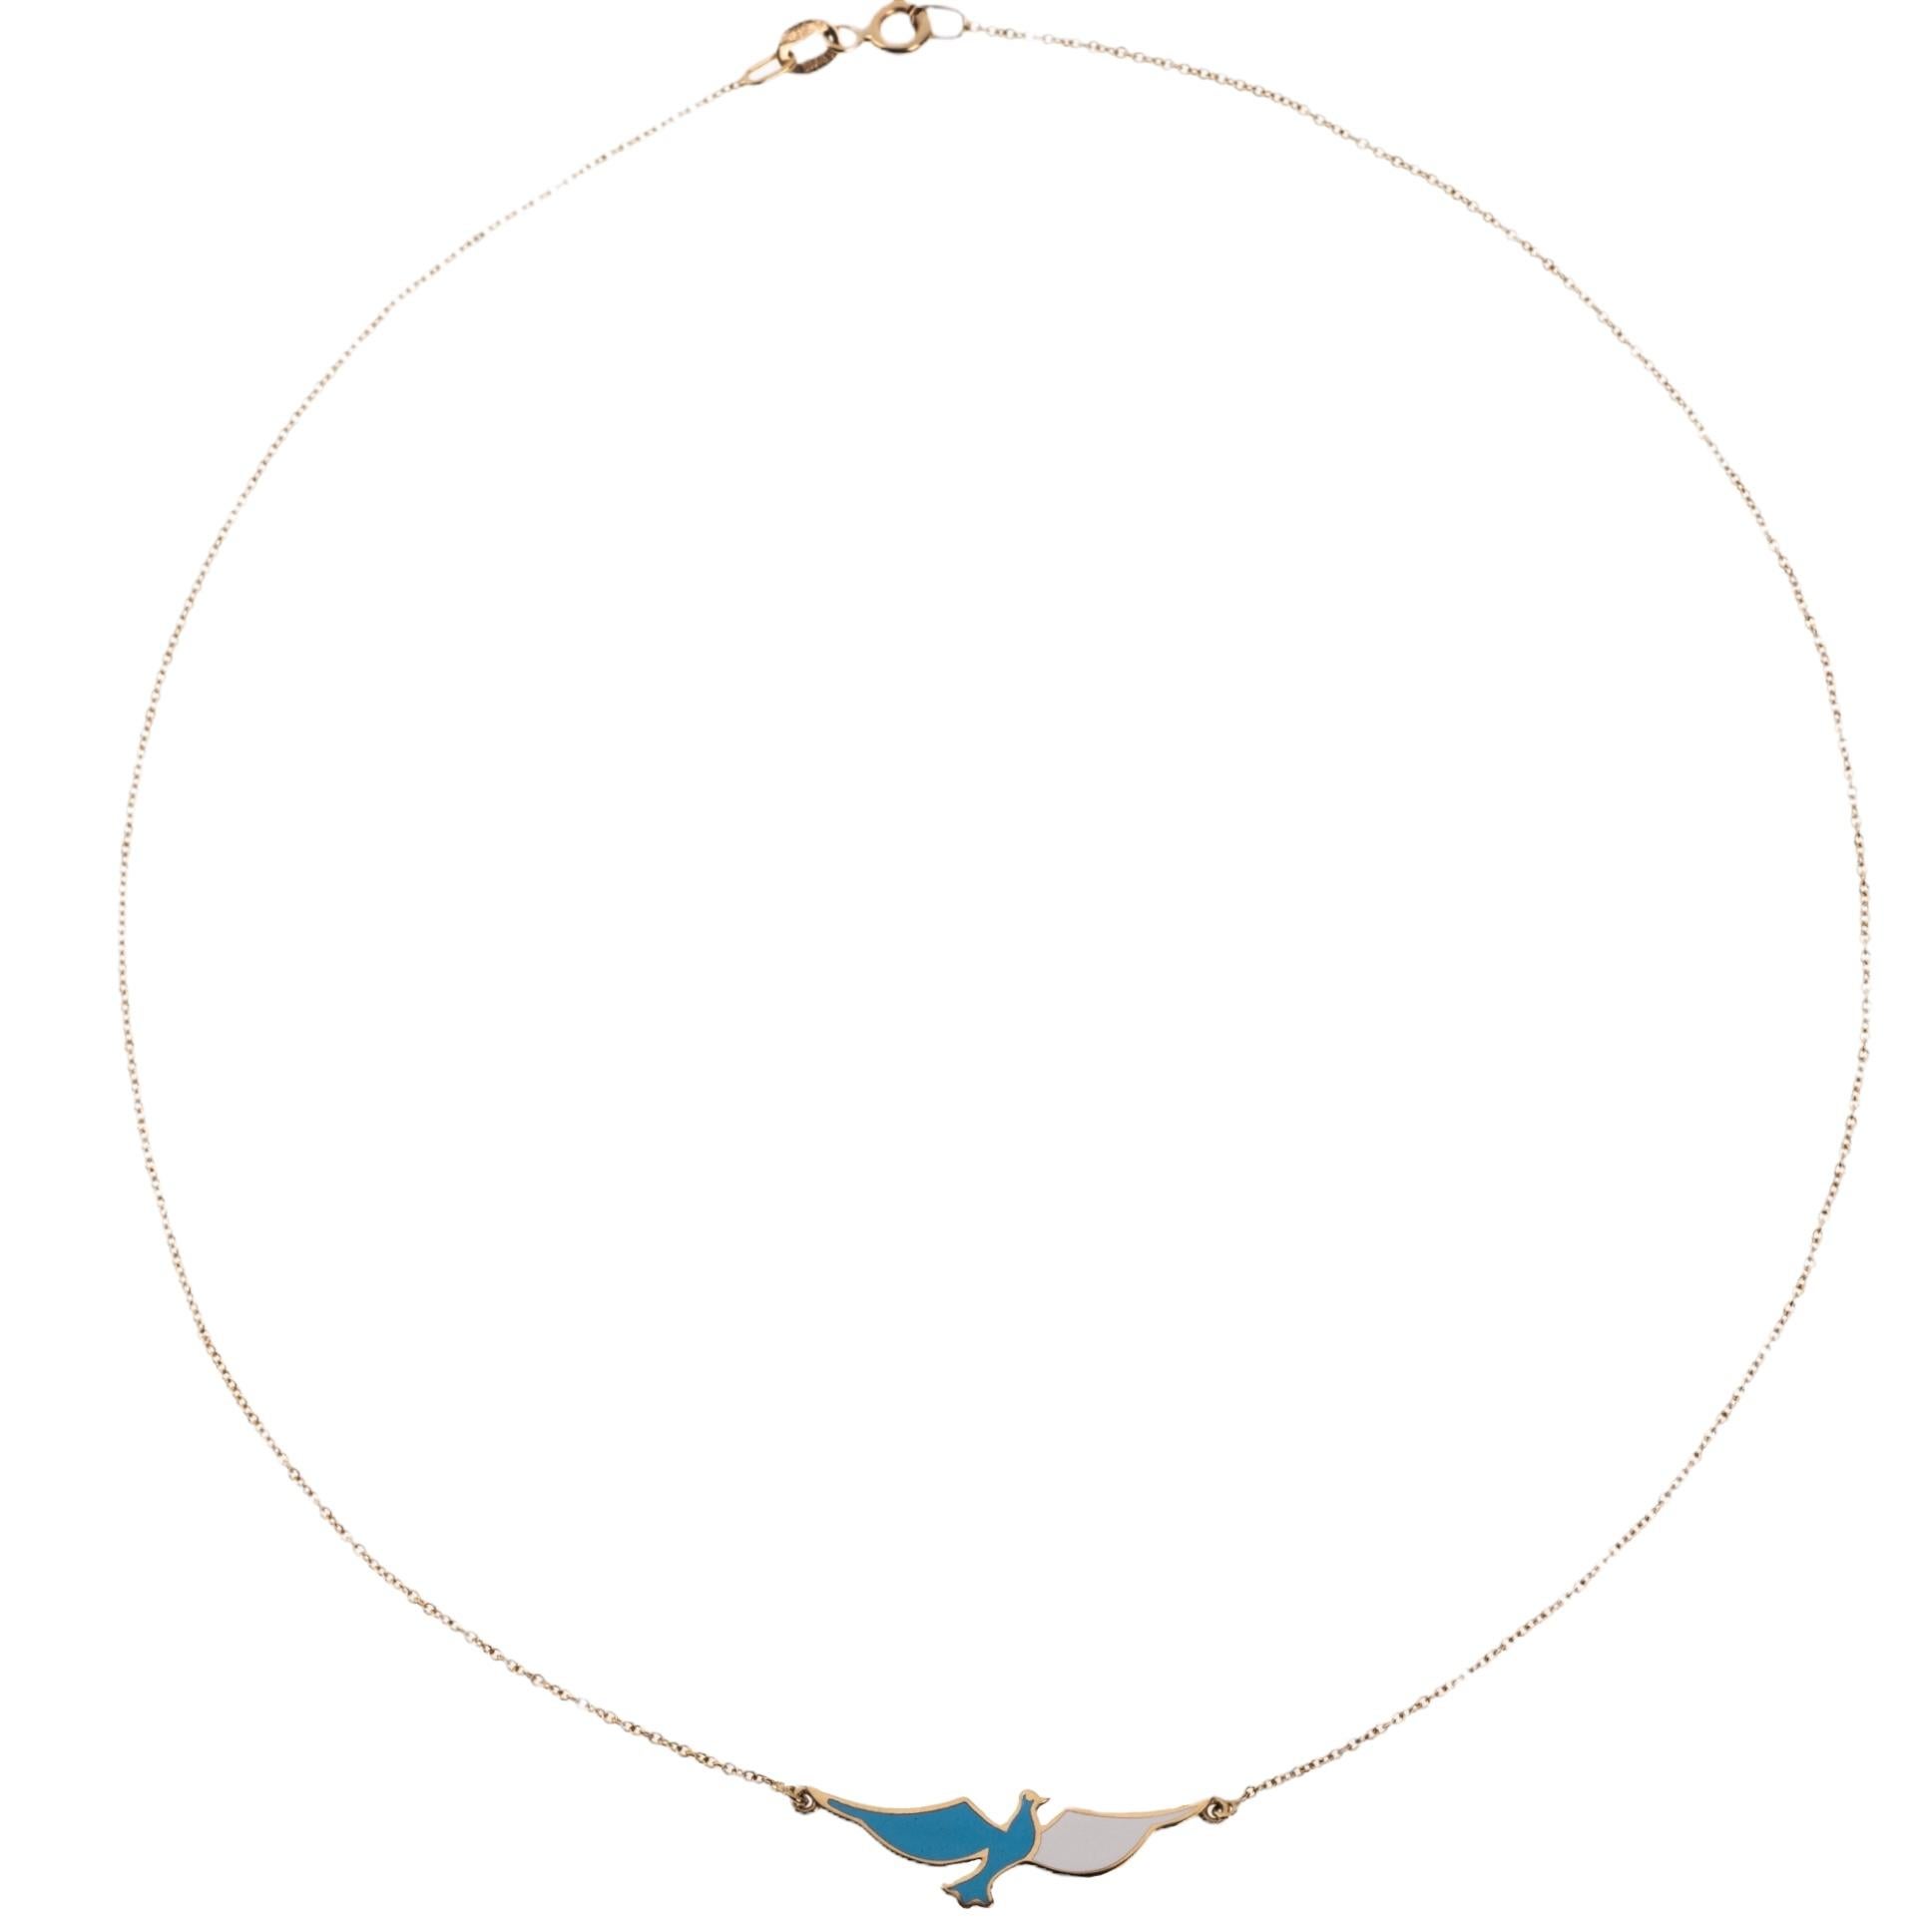 The Flying Dove, necklace is crafted in 18K yellow gold, hallmarked in Cyprus. This exquisite piece of jewelry comes in a highly polished finish with white enamel.  It is also available in different color combinations, allowing you to select the one